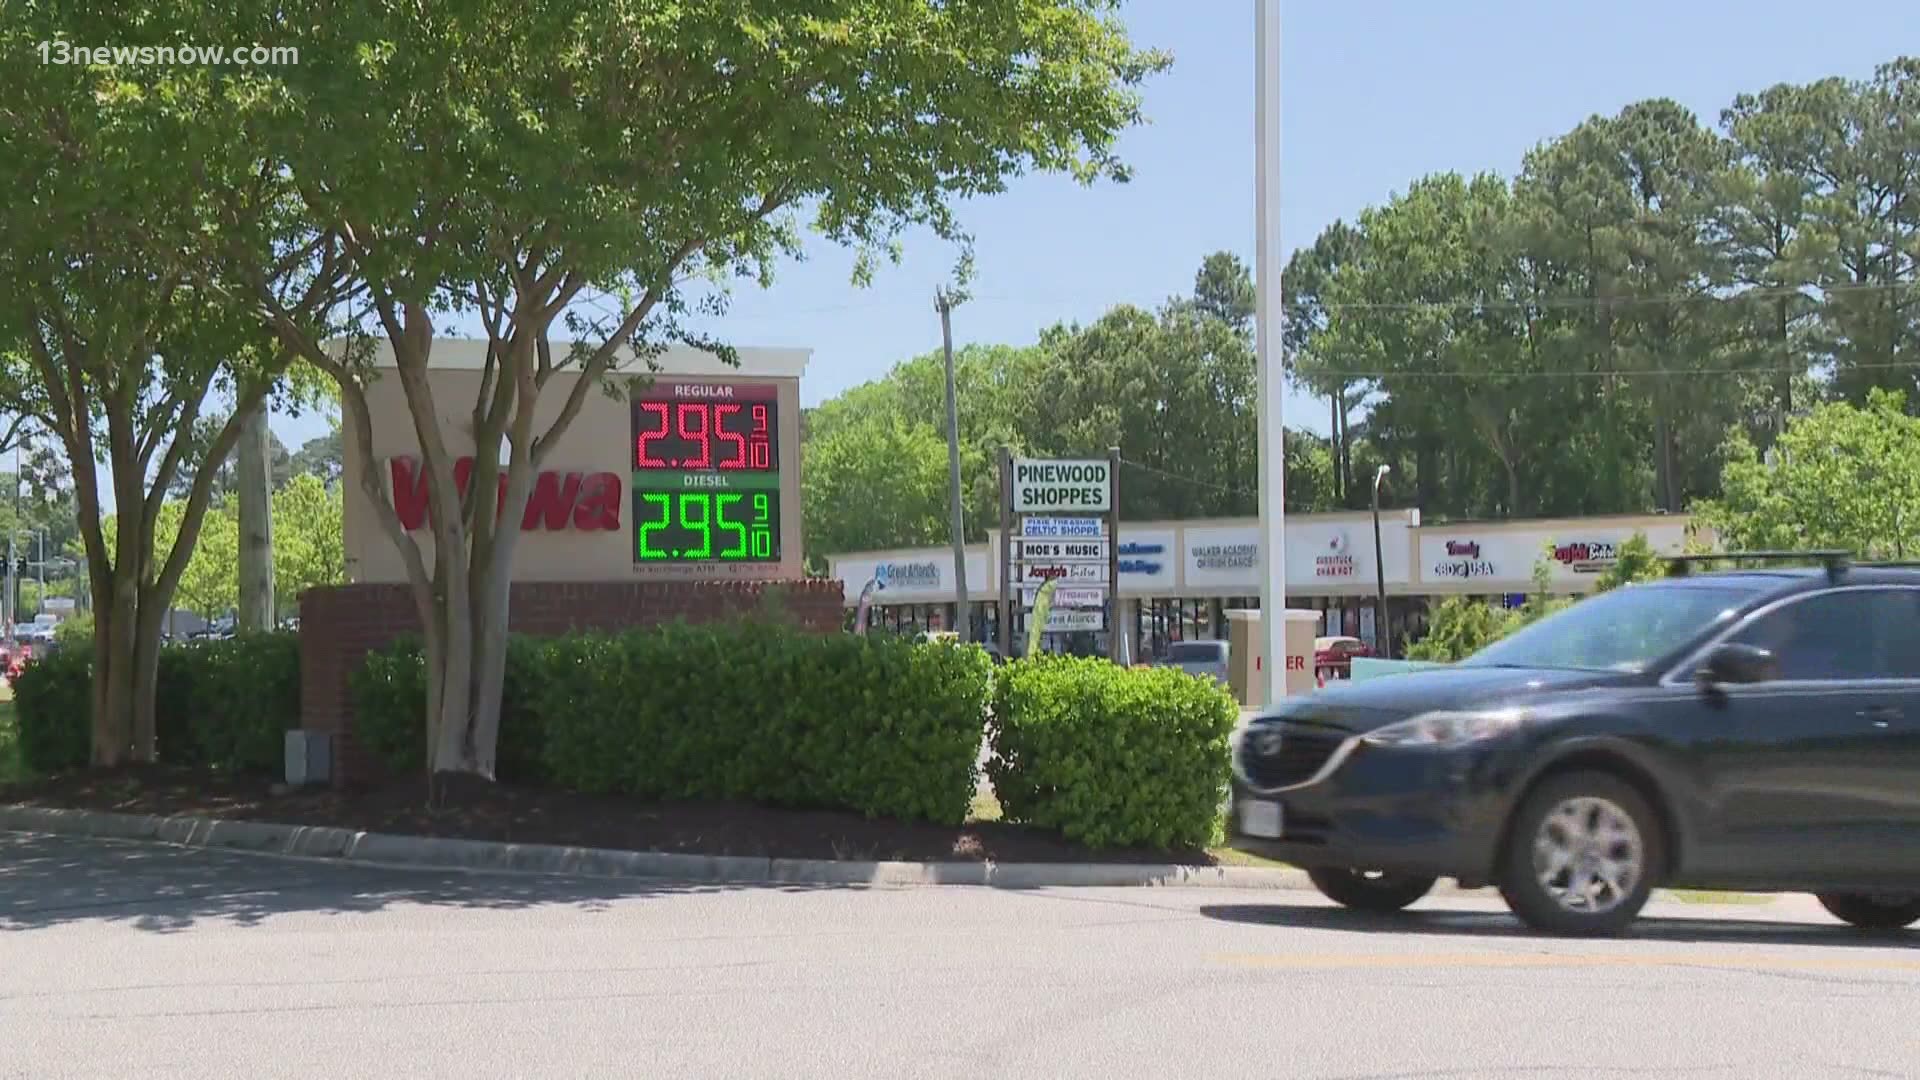 Gas is slowly flowing back to Virginia and North Carolina, but it won't happen overnight! Prices may still rise more in the meantime.